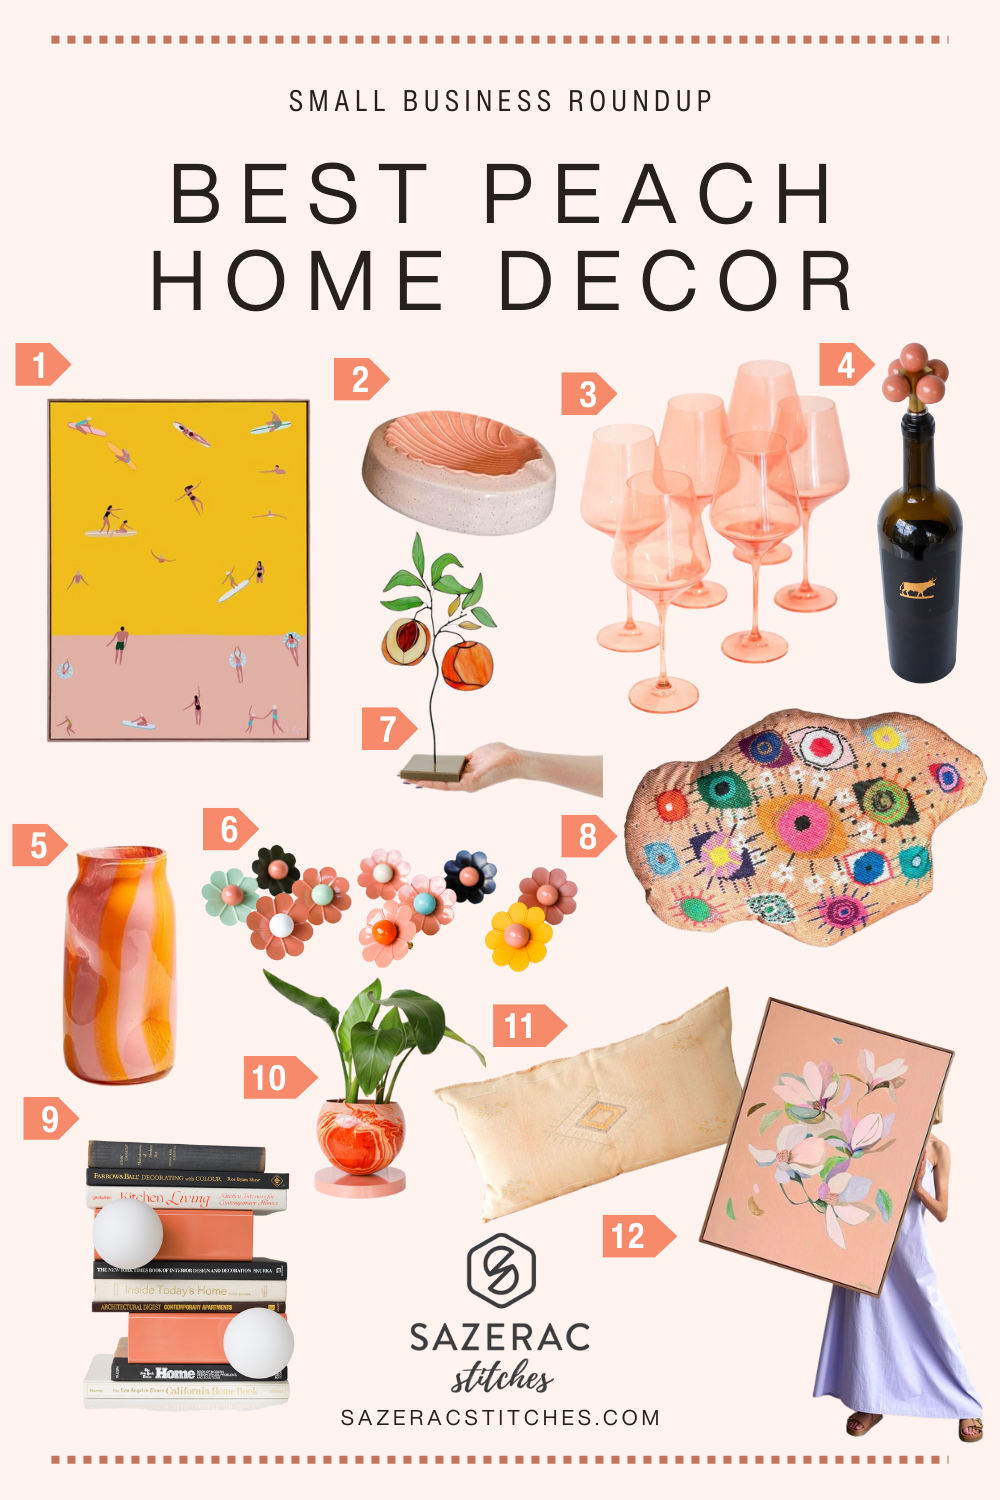 The Best Peach Home Decor from Small Businesses